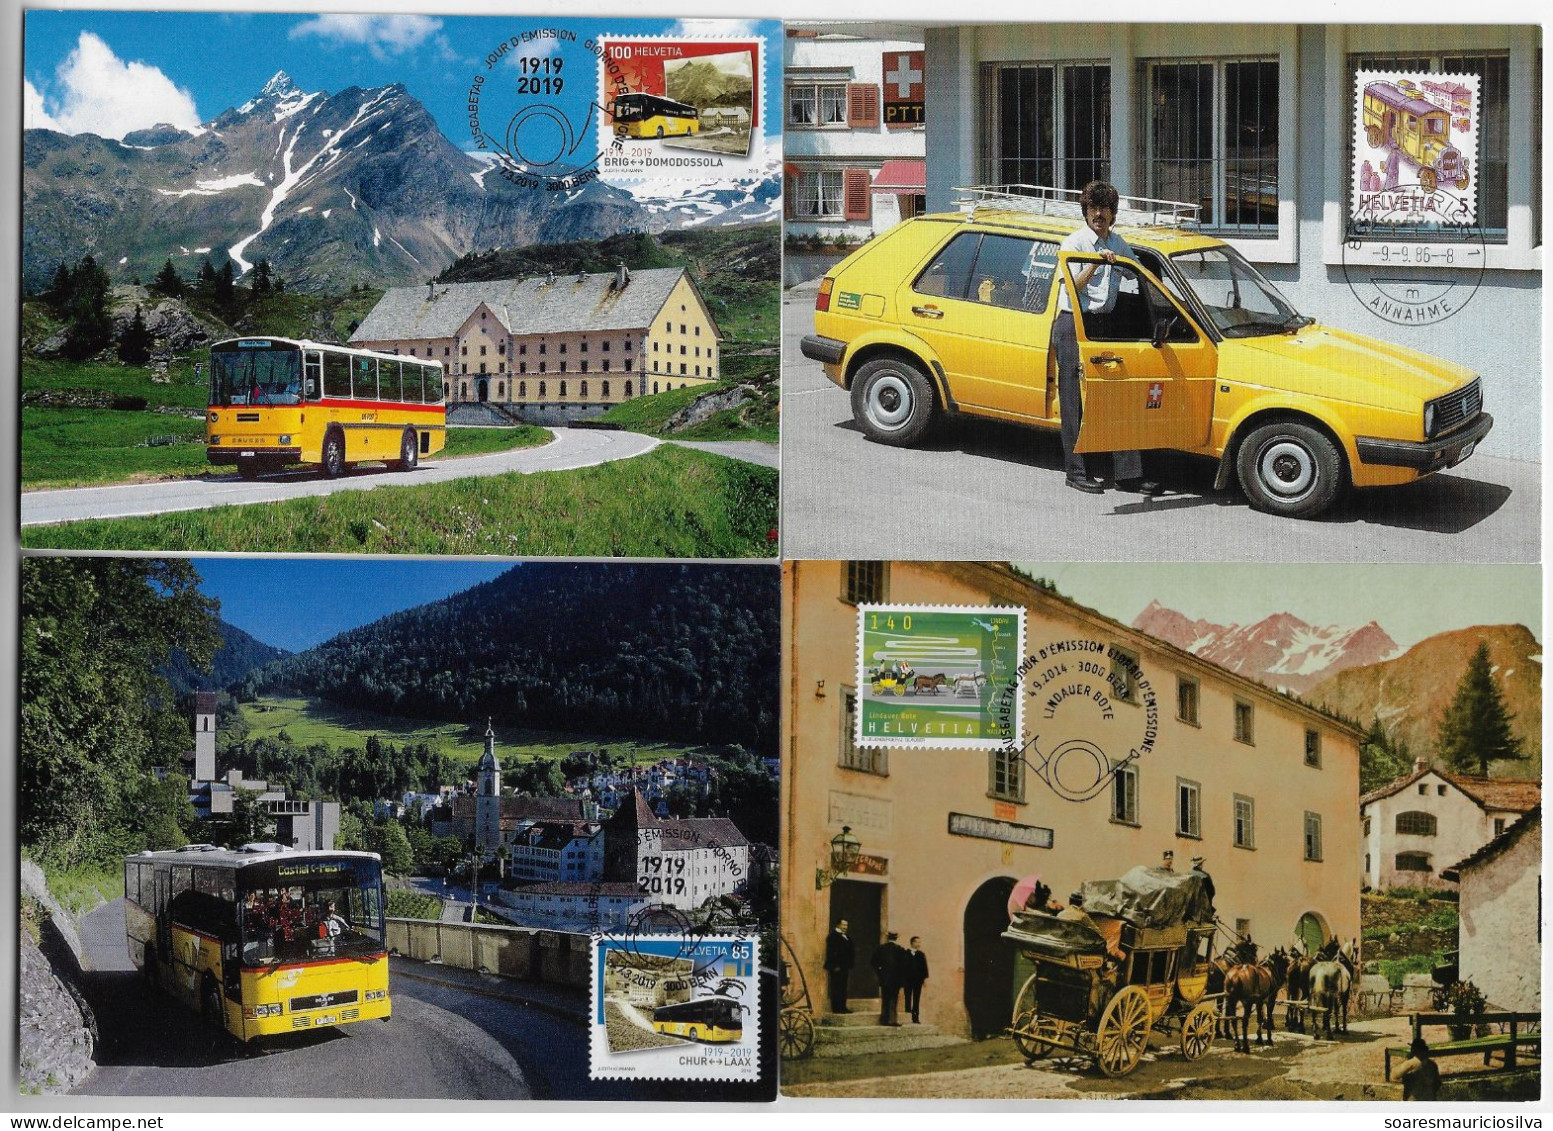 Switzerland 1986/2019 4 Maximum Card Postal Transport Bus Stagecoach Car Mail Office - Busses